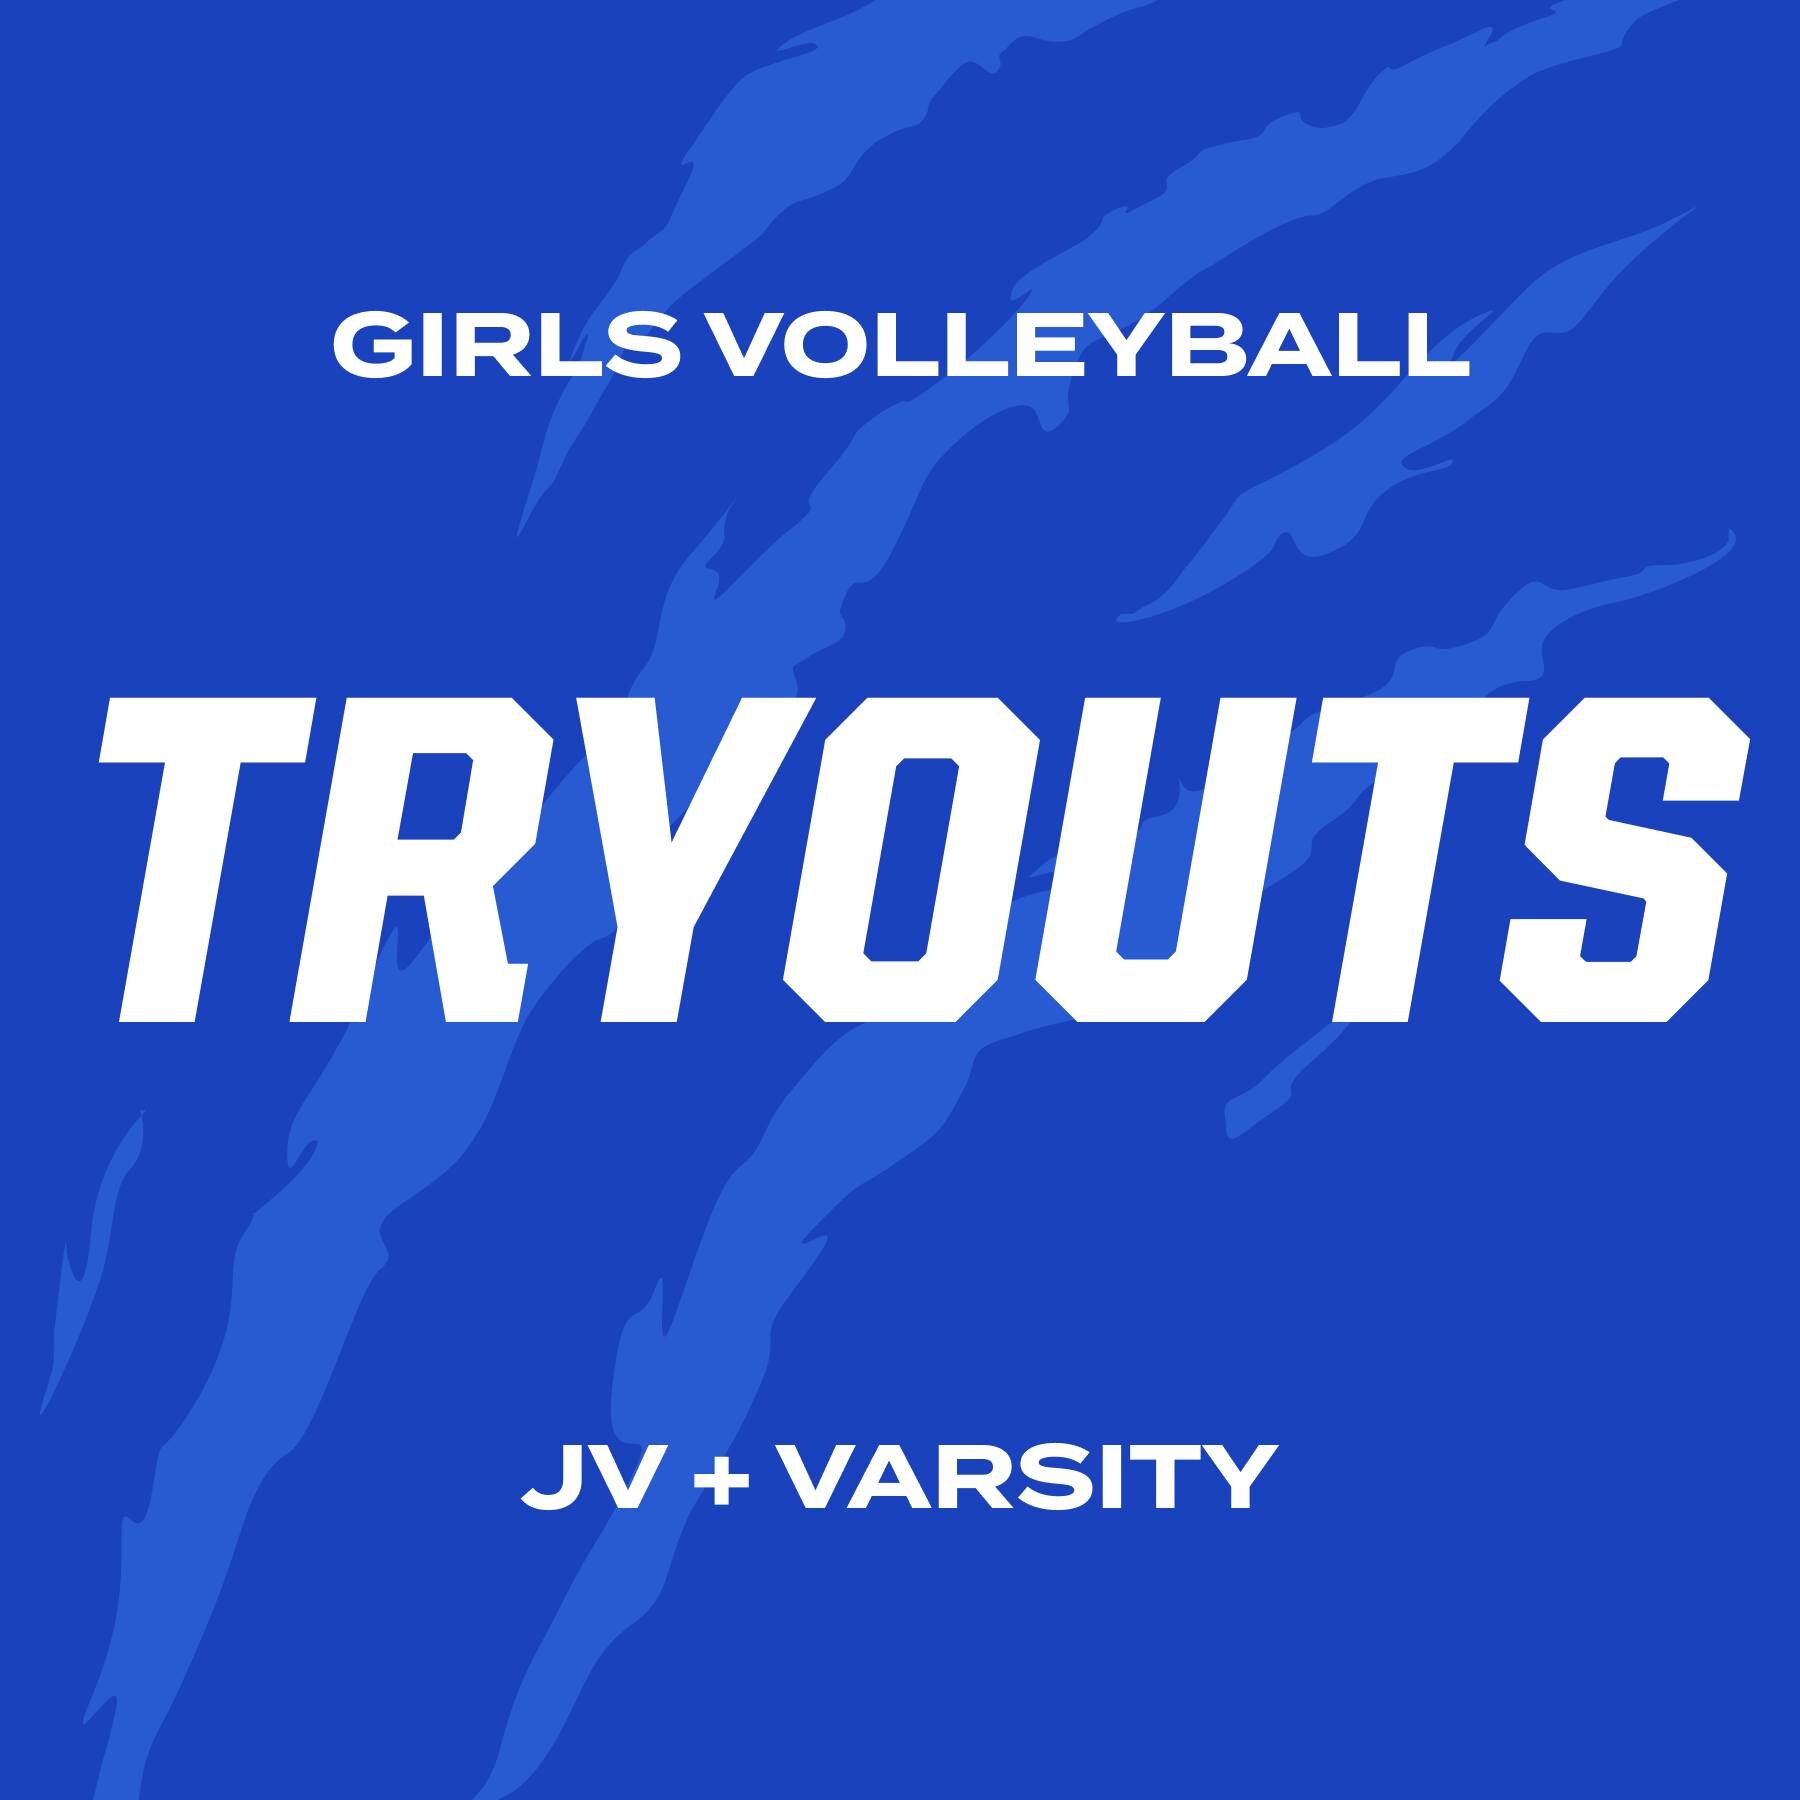 High School tryout date (JV and Varsity):
June 11, from 2:00pm-4:00pm @ Calvary Bible Church

Middle School open gym dates:
August 6 &amp; 8, from 10:30am-12:30pm @ Calvary Bible Church 

Middle School tryouts:
August 13, 10:30am-12:30pm @ Calvary Bi